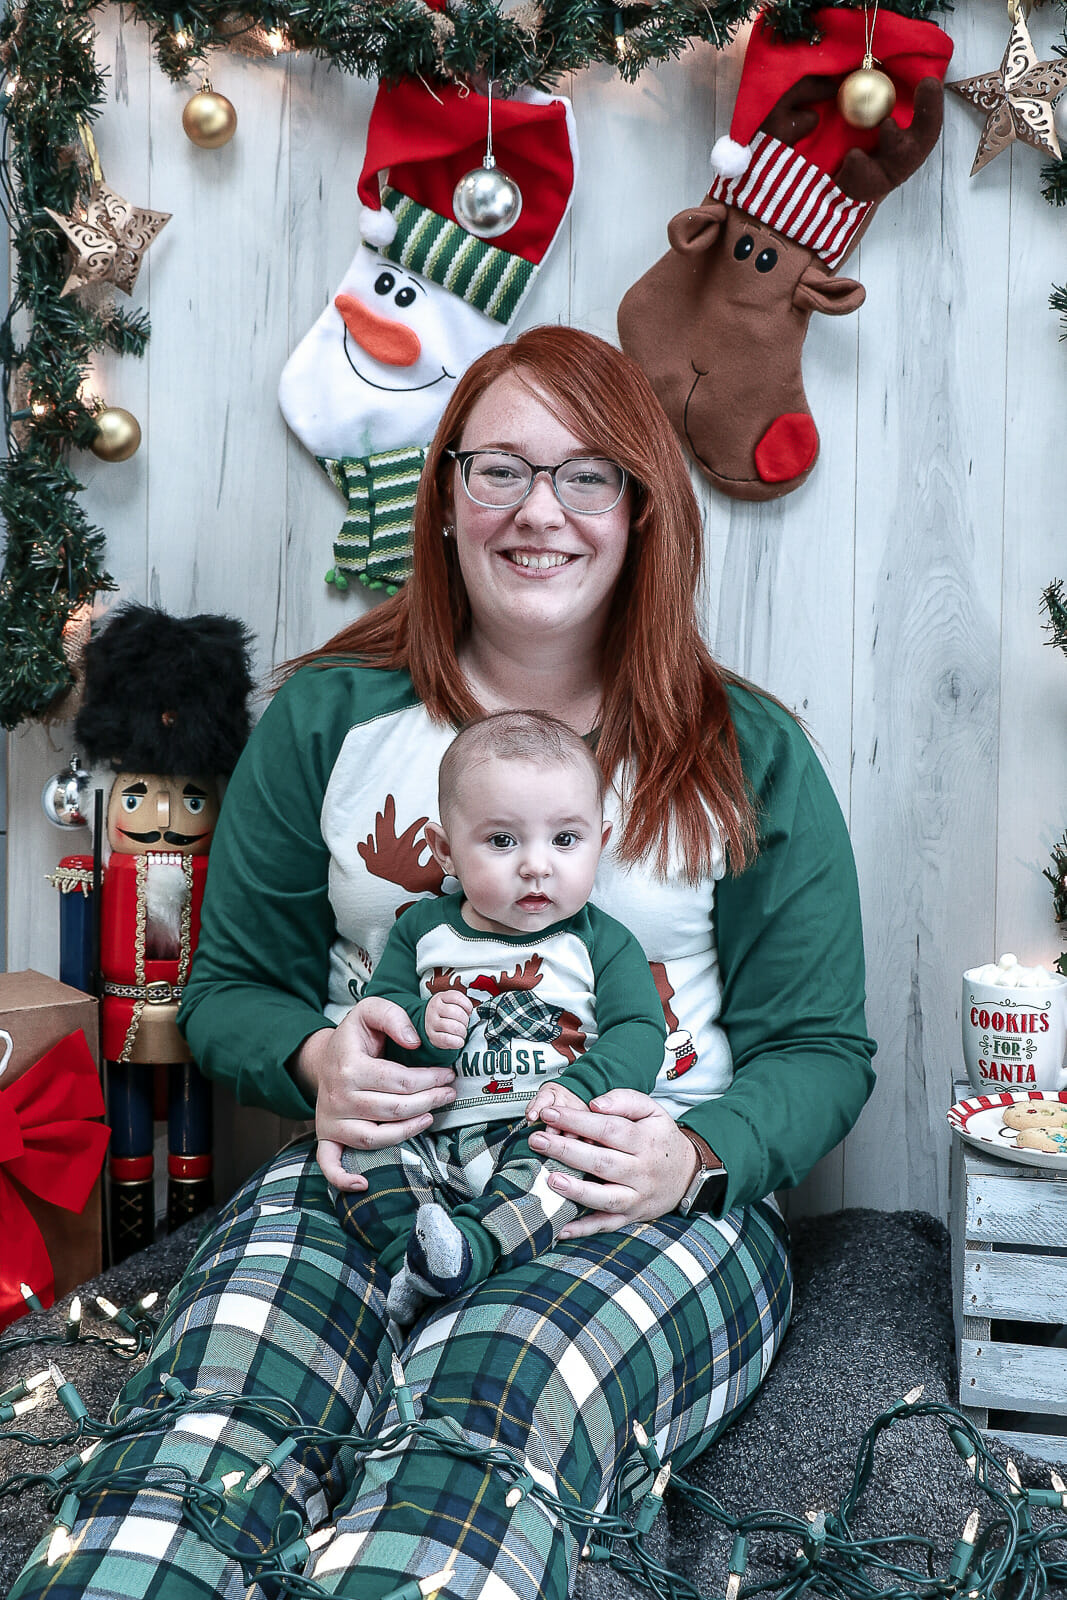 A photo from the Kay Christmas Mini Shoot, shot in Port Wade, Nova Scotia on wintery morning inside with Christmas tree, stockings and nutcrackers.